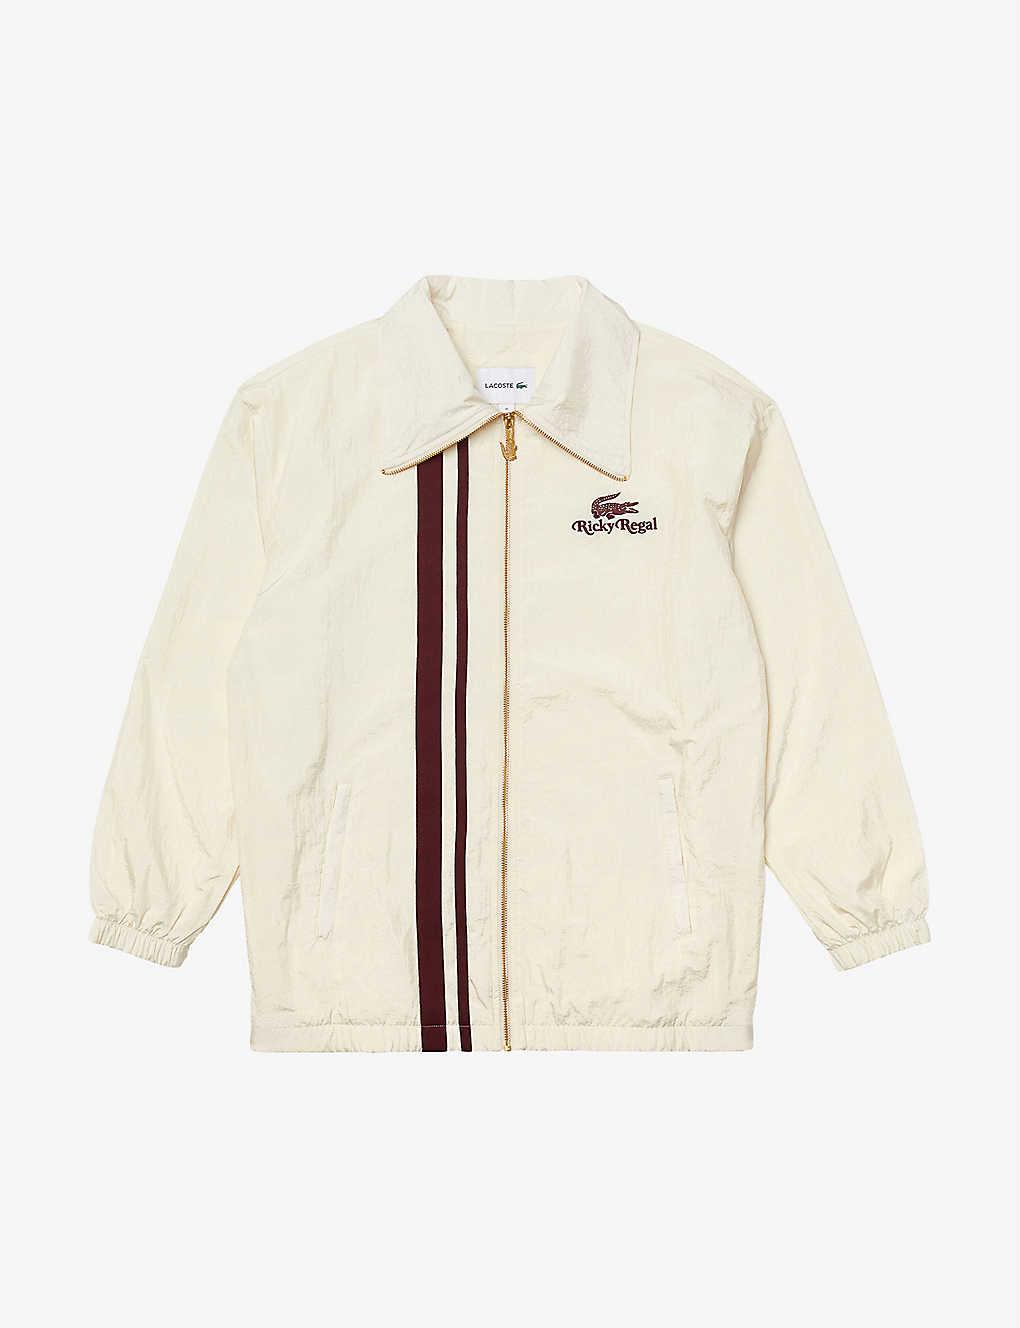 Lacoste X Ricky Regal Striped-trim Woven Coach Jacket in Natural for Men |  Lyst